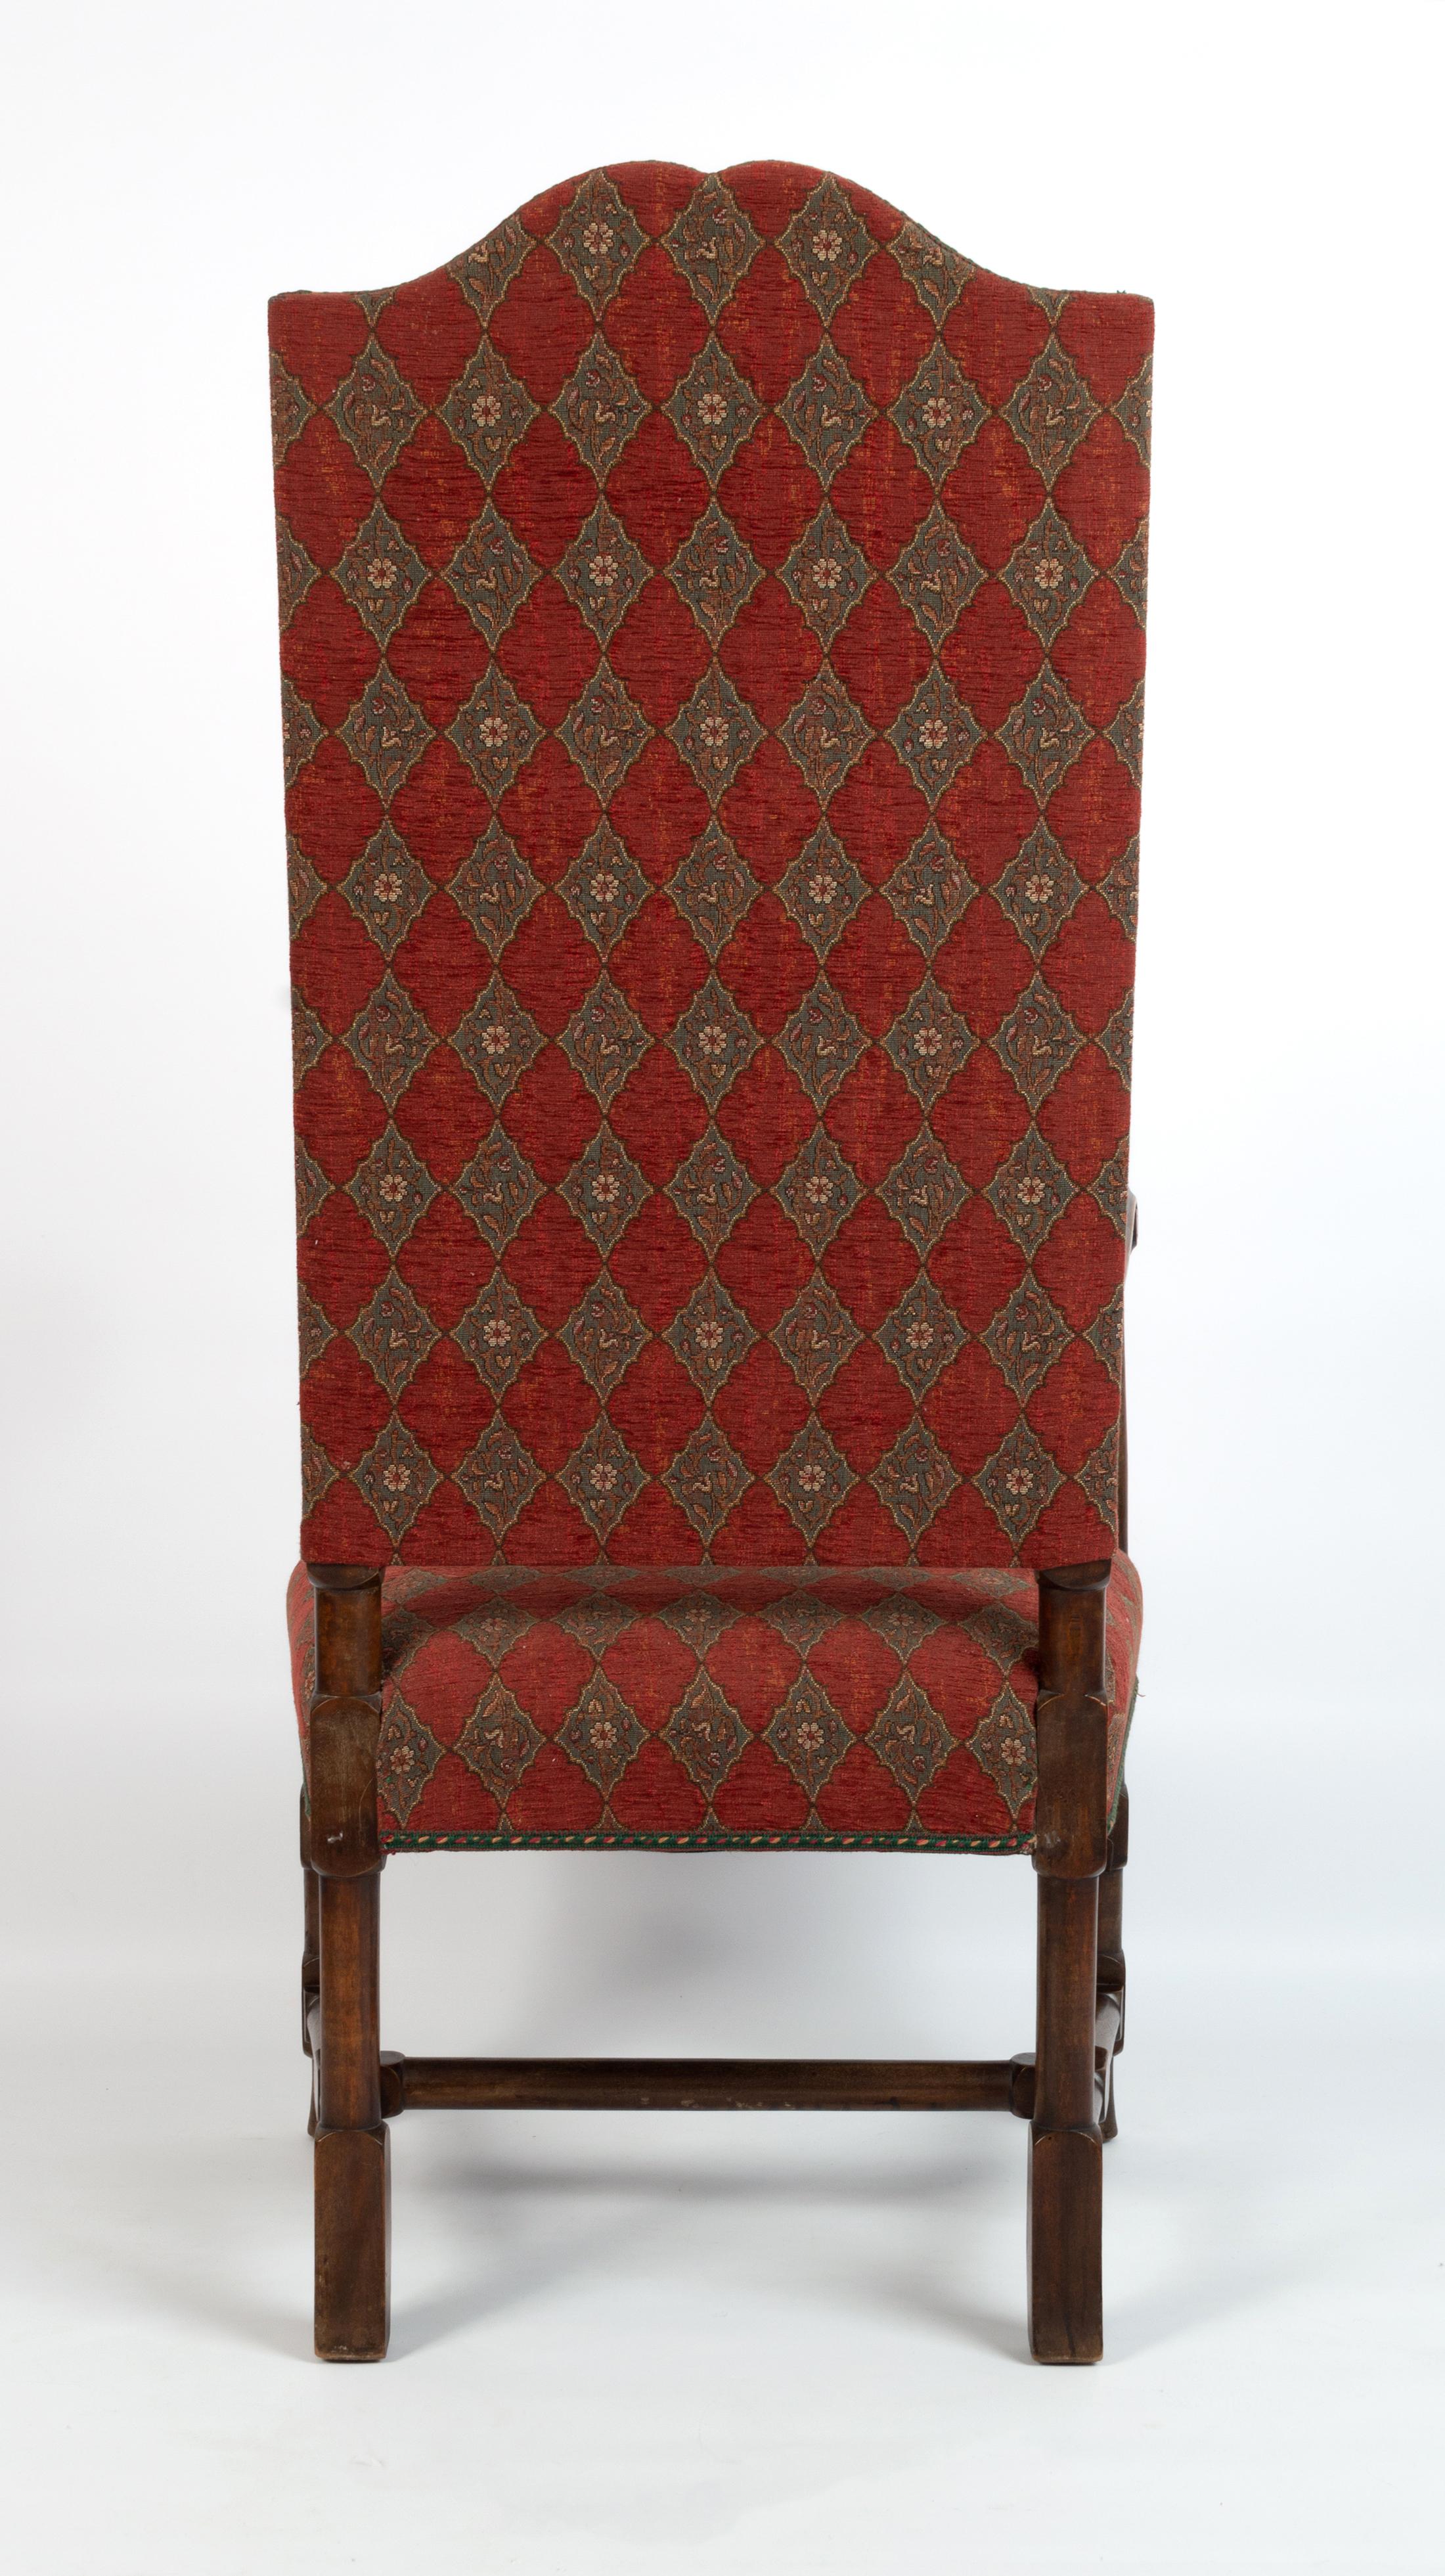 English 19th Century Charles II Style Upholstered High Back Elbow Chair For Sale 1